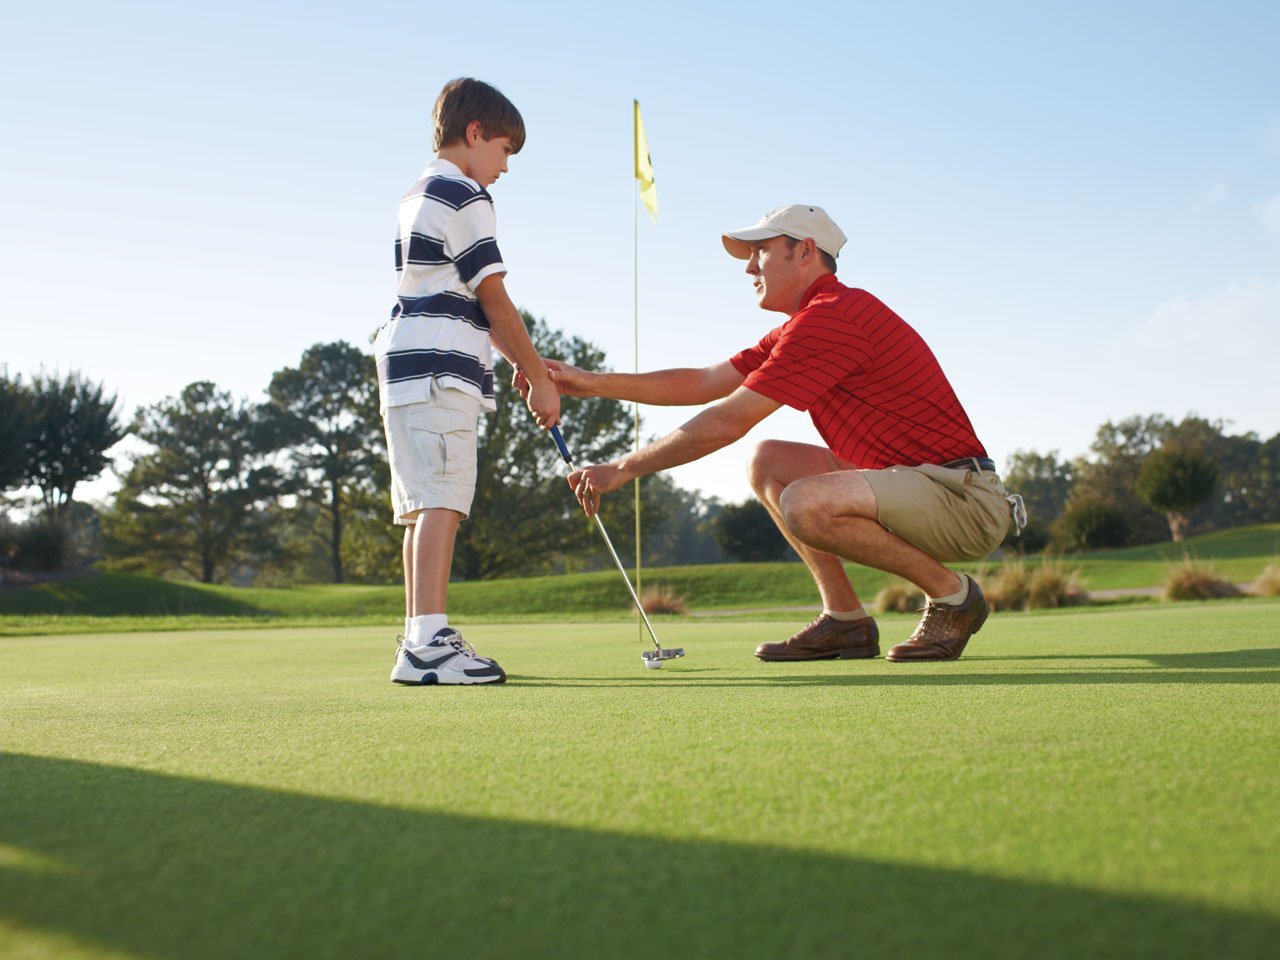 A father bending down to teach his son to golf